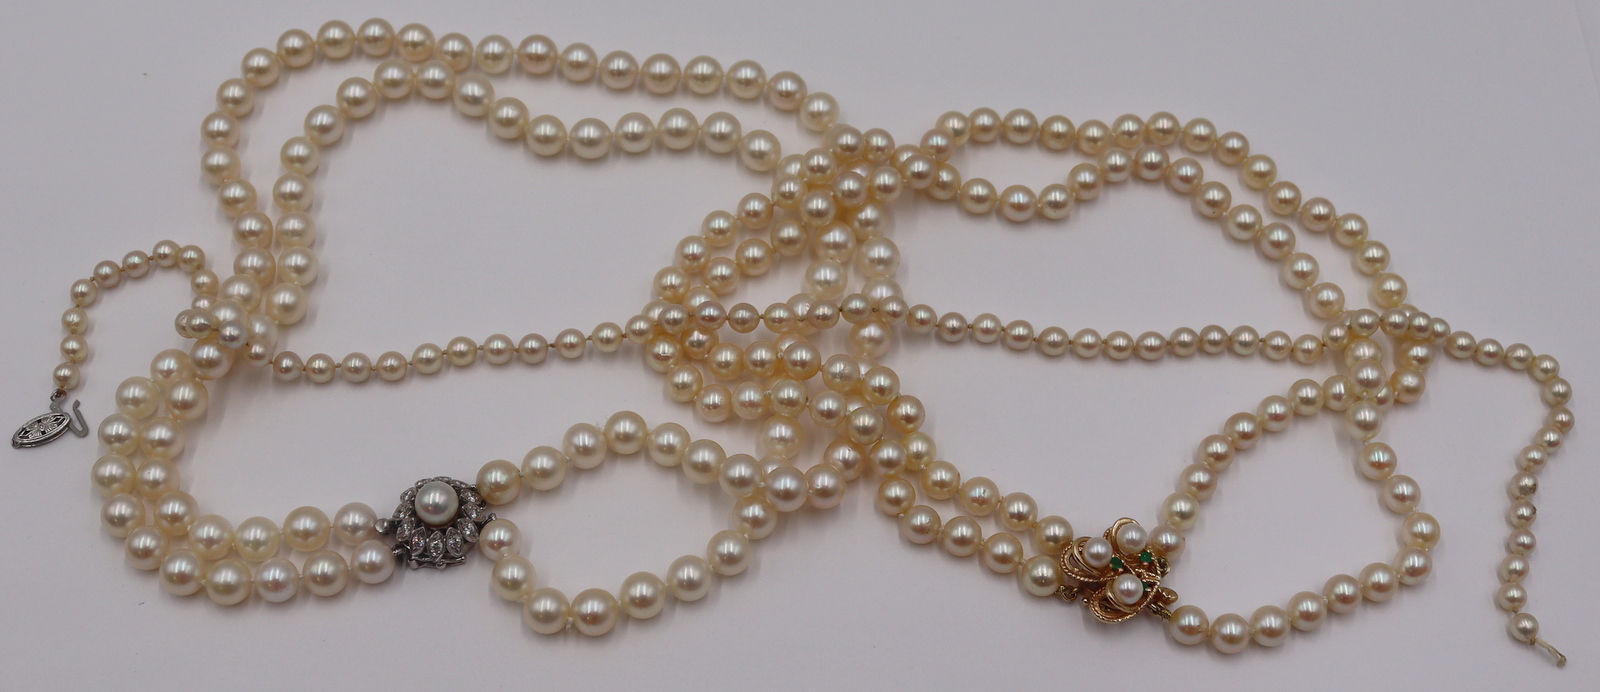 JEWELRY PEARL AND 14KT GOLD NECKLACE 3bcbed